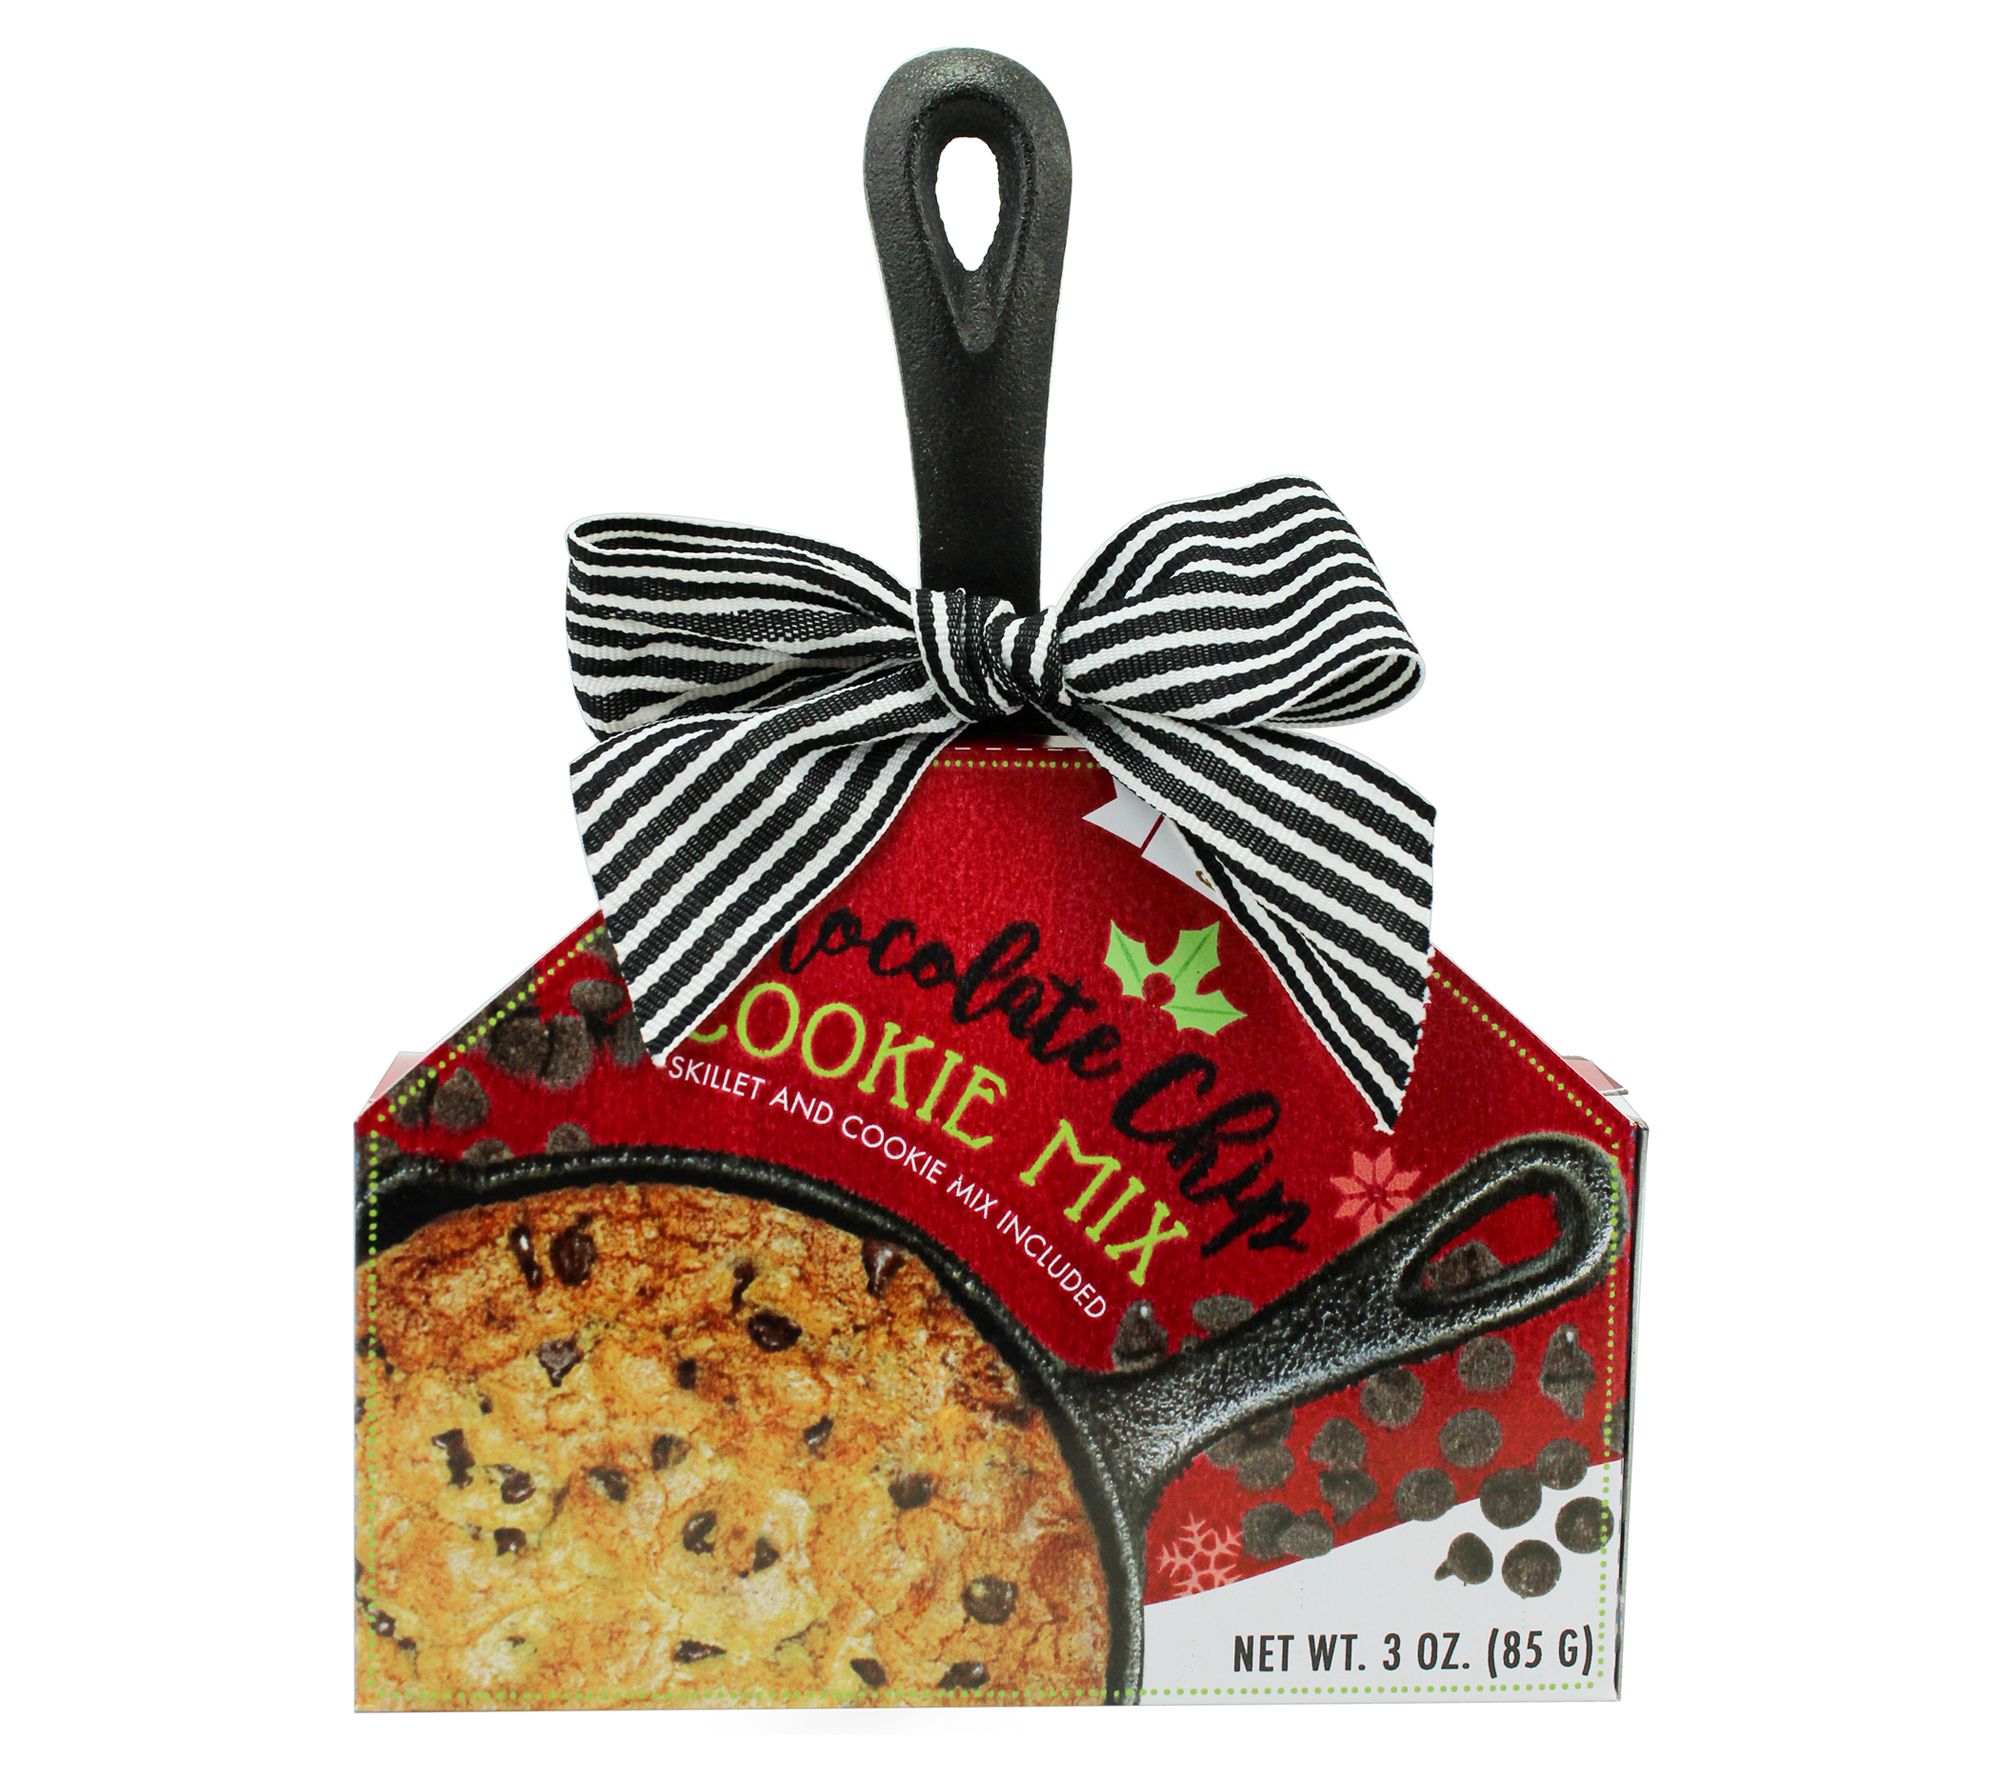 6.25 Cast Iron Skillet w/ Baking Mix Gift Set (Chocolate Chip or